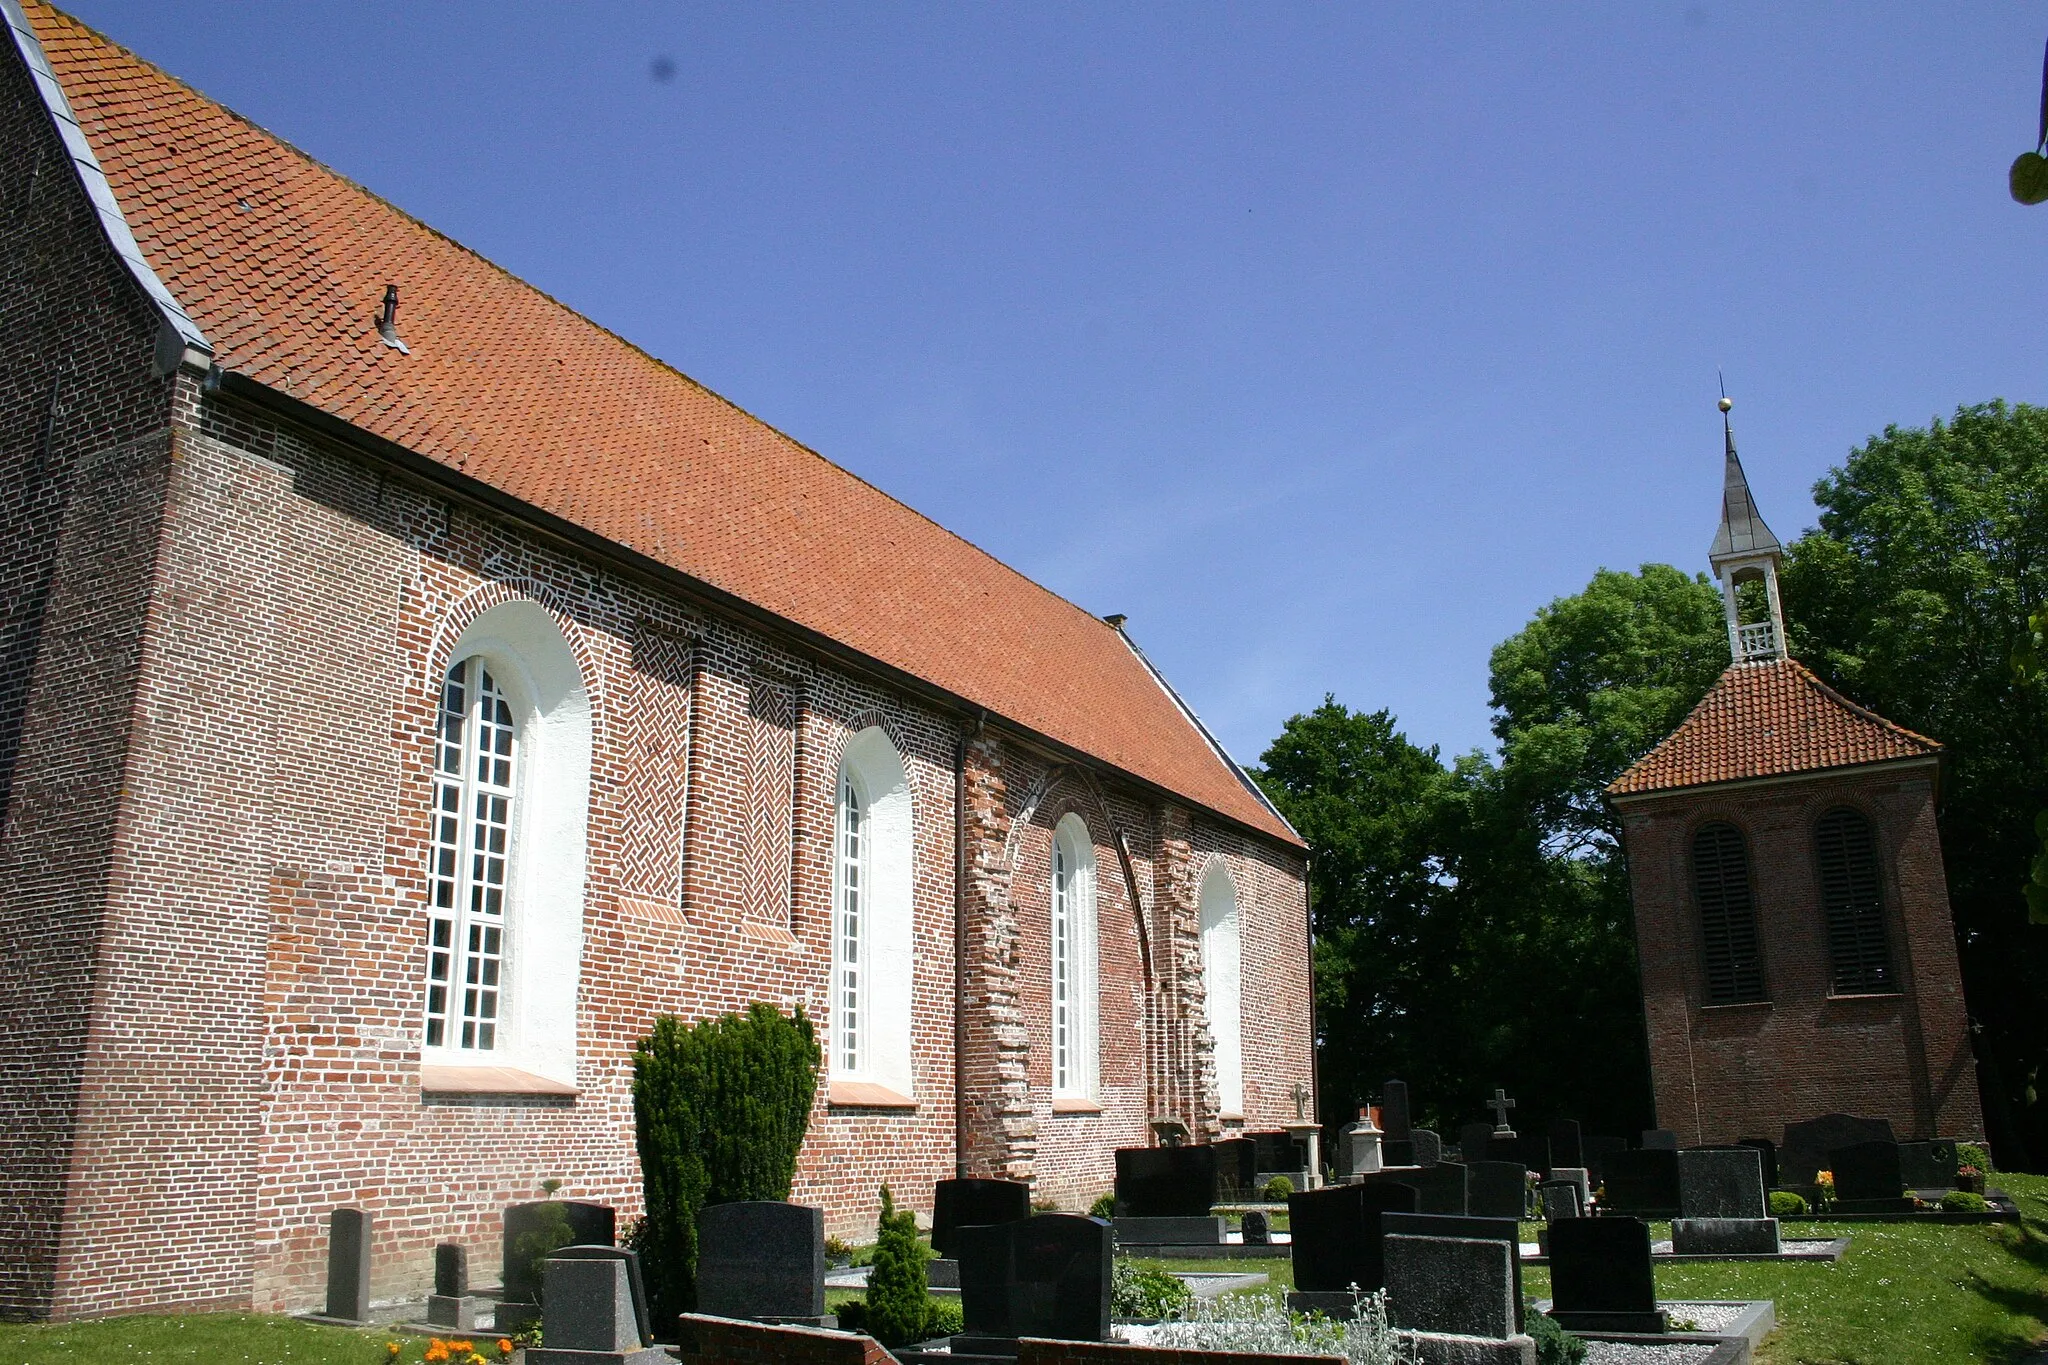 Photo showing: The Evangelical Reformed Saint Sebastian's Church in Hatzum (a locality of Jemgum), district of Leer, East Frisia, Lower Saxony, Germany, is owned and used by a Reformed congregation within the Evangelical Reformed Church – Synod of Reformed Churches in Bavaria and Northwestern Germany.